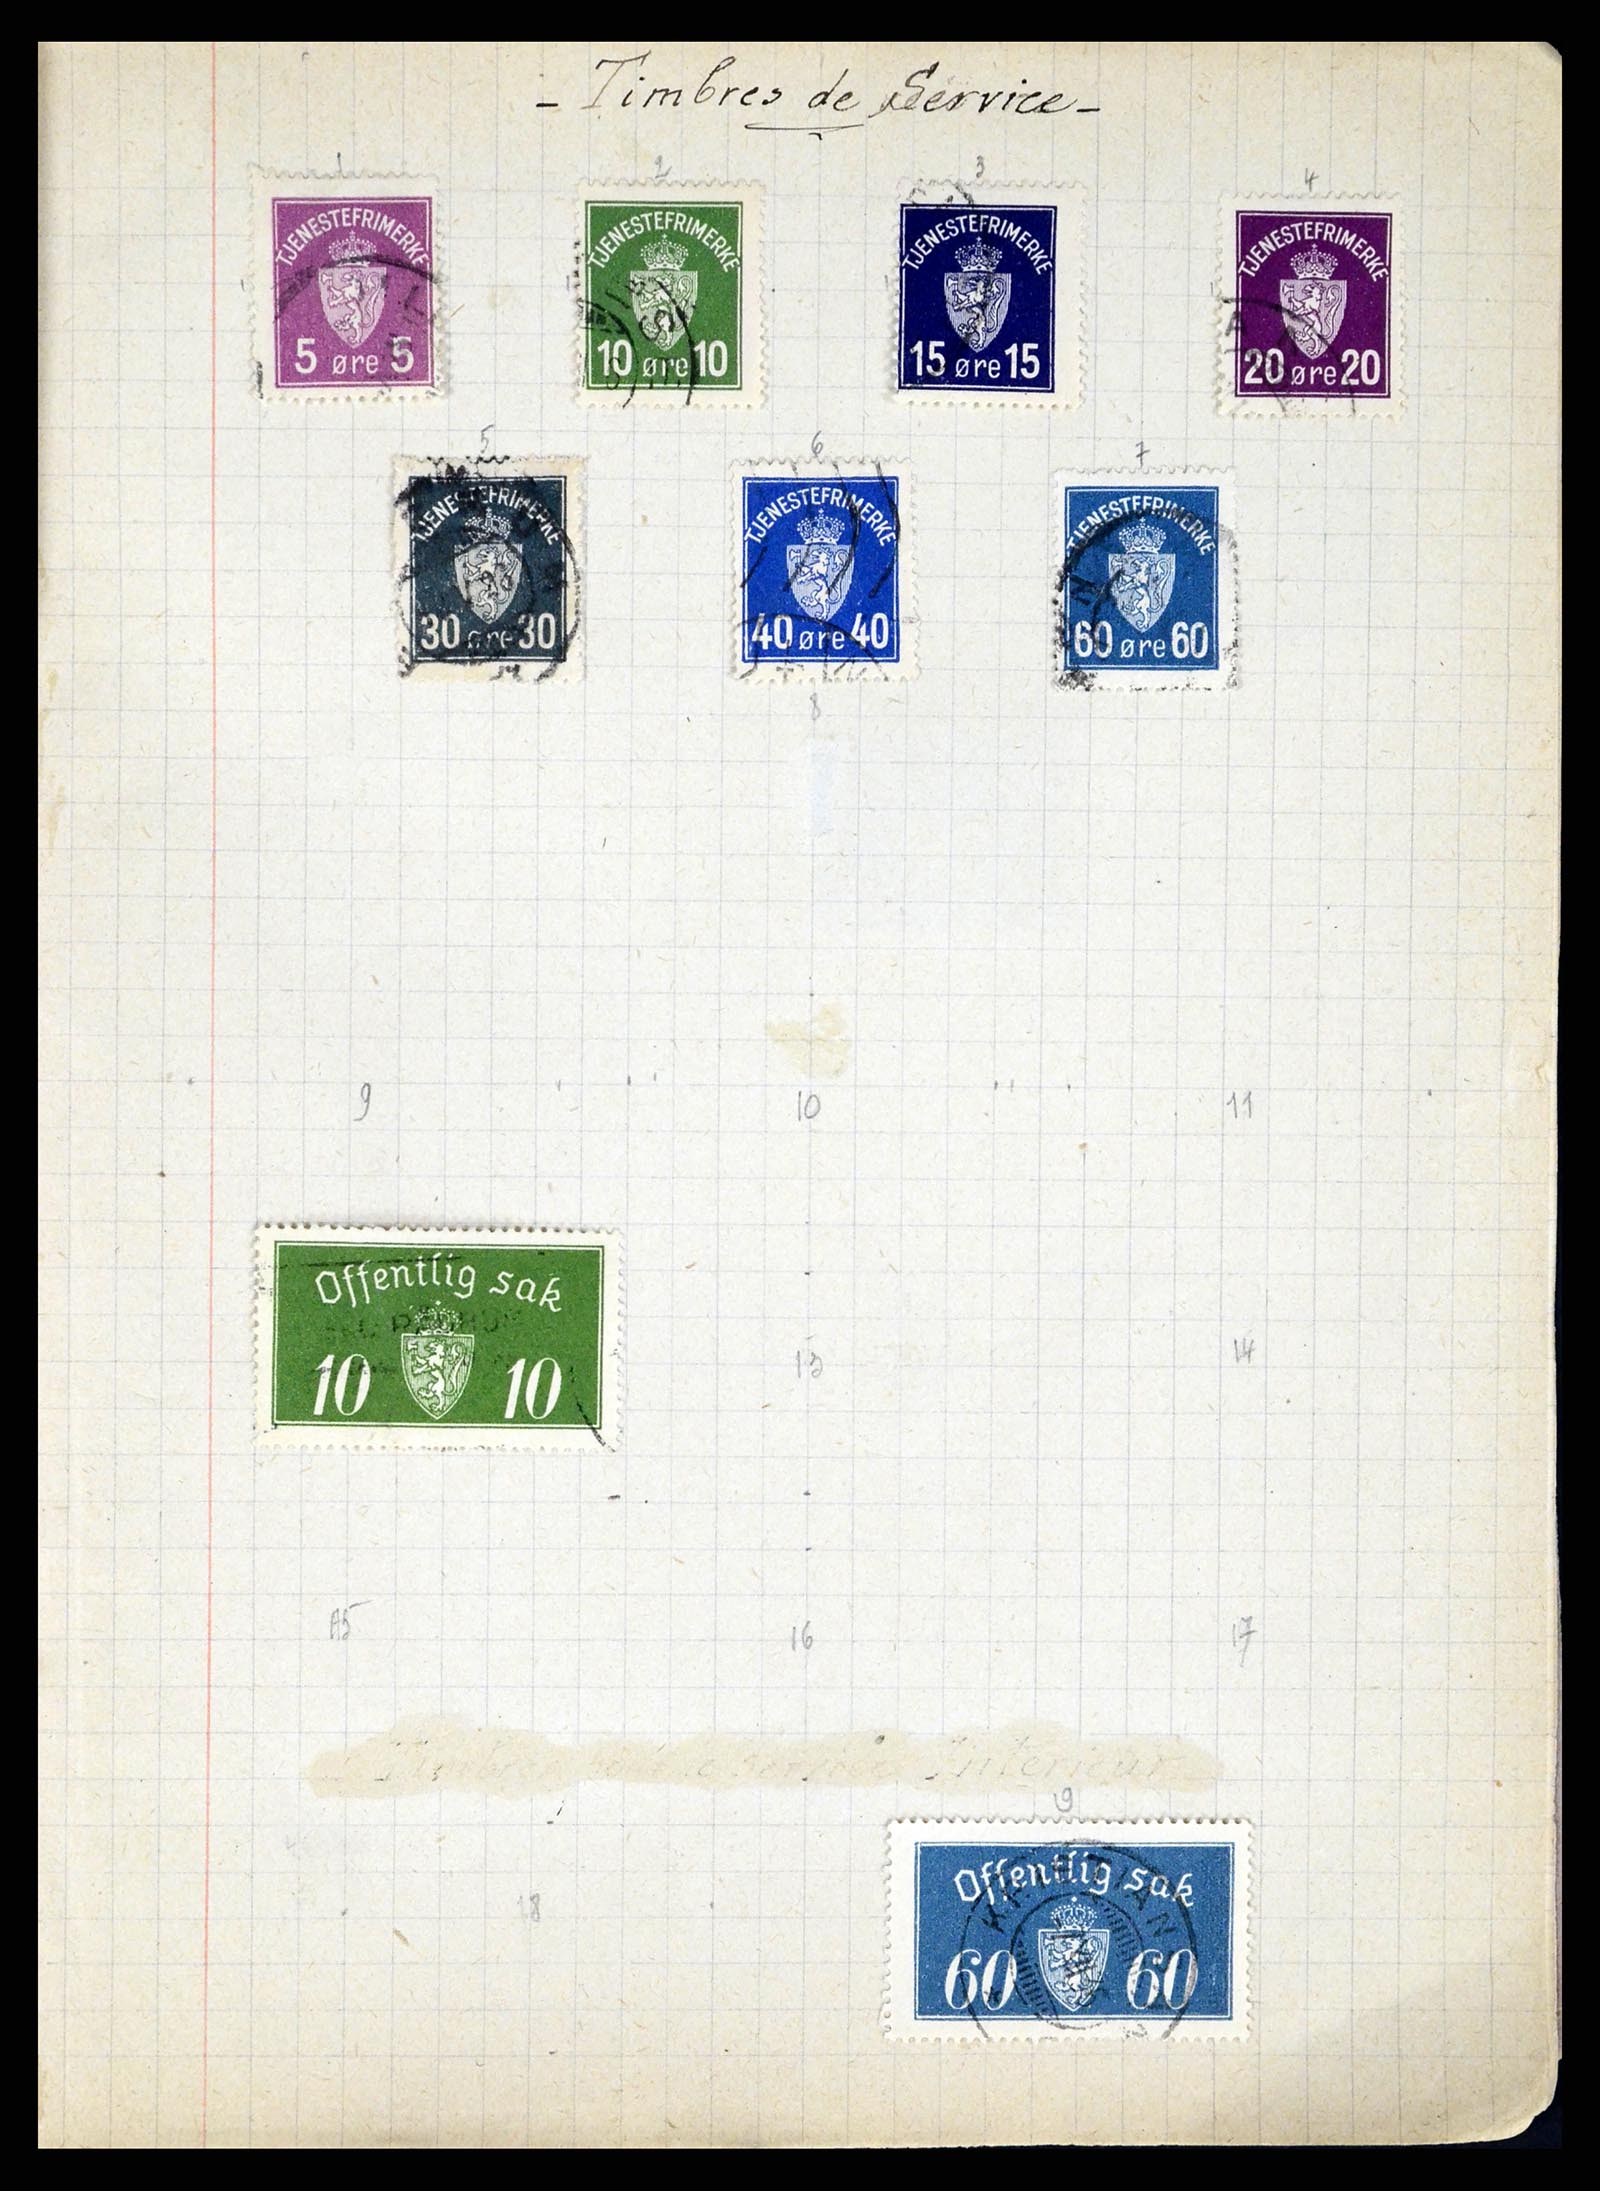 37280 022 - Stamp collection 37280 World classic 1840-1900.